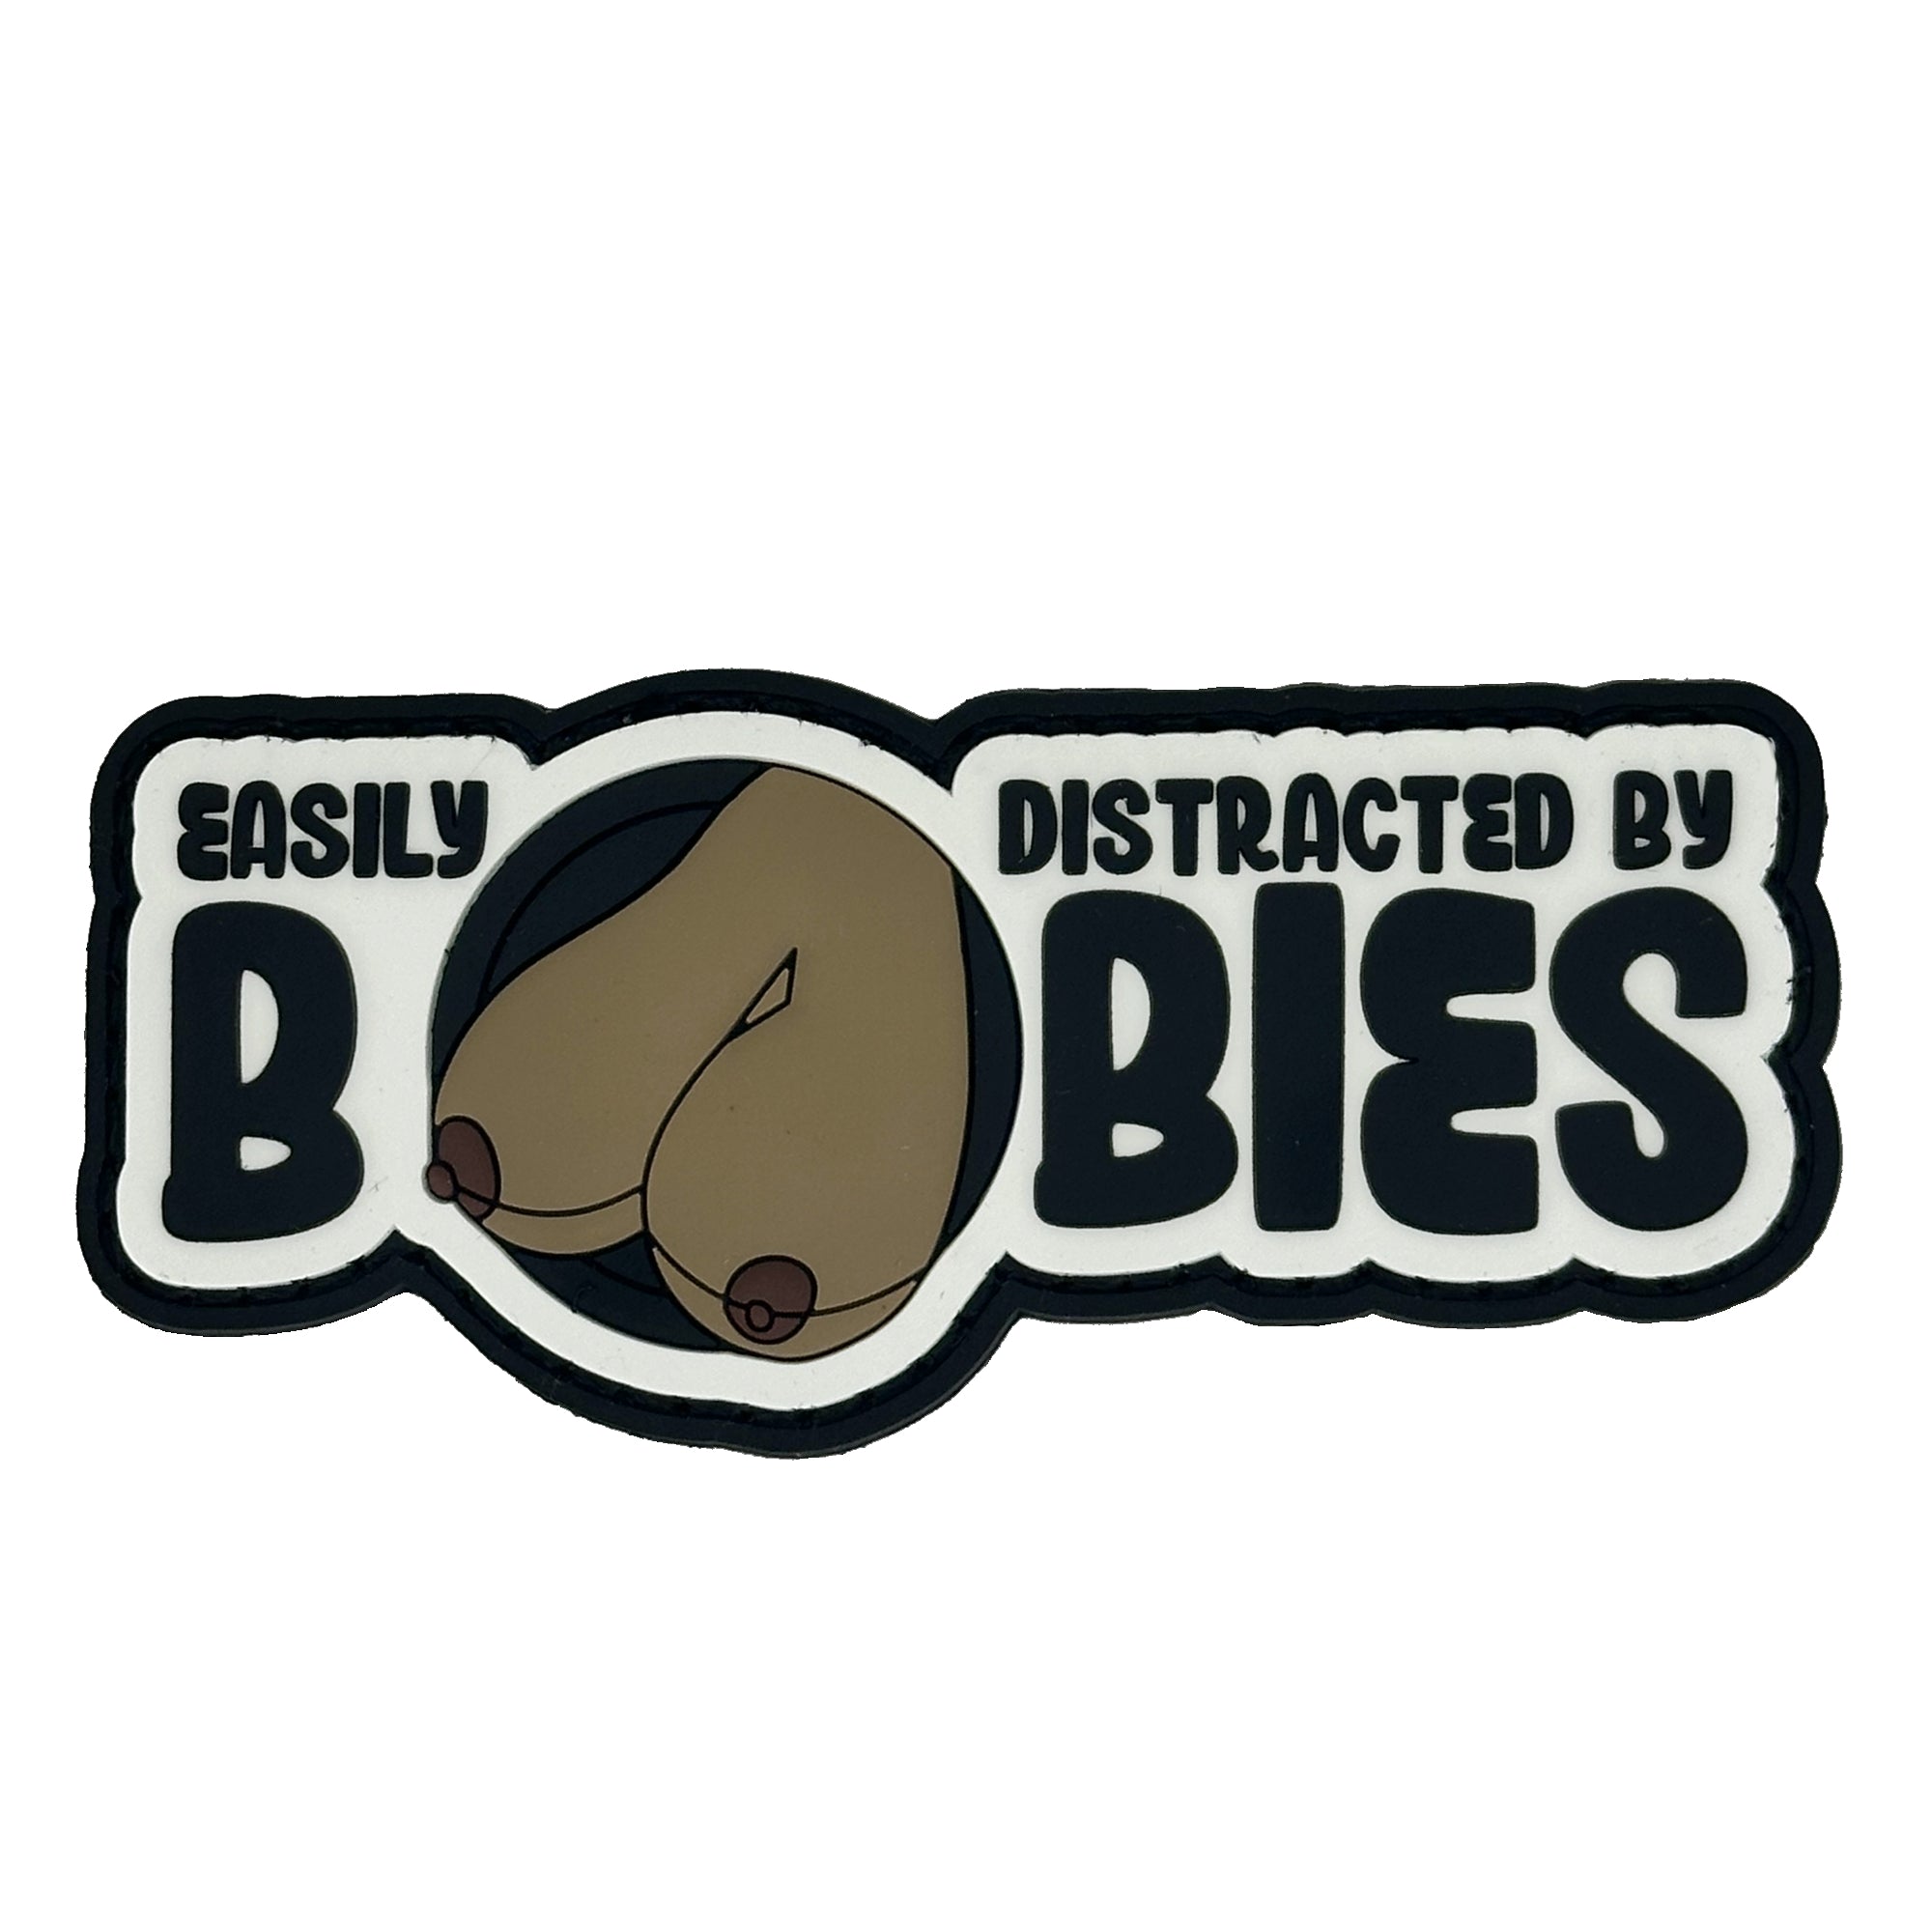 "Fun Size" - Easily Distracted By Boobies (Uncensored) - 4 inch PVC Patch